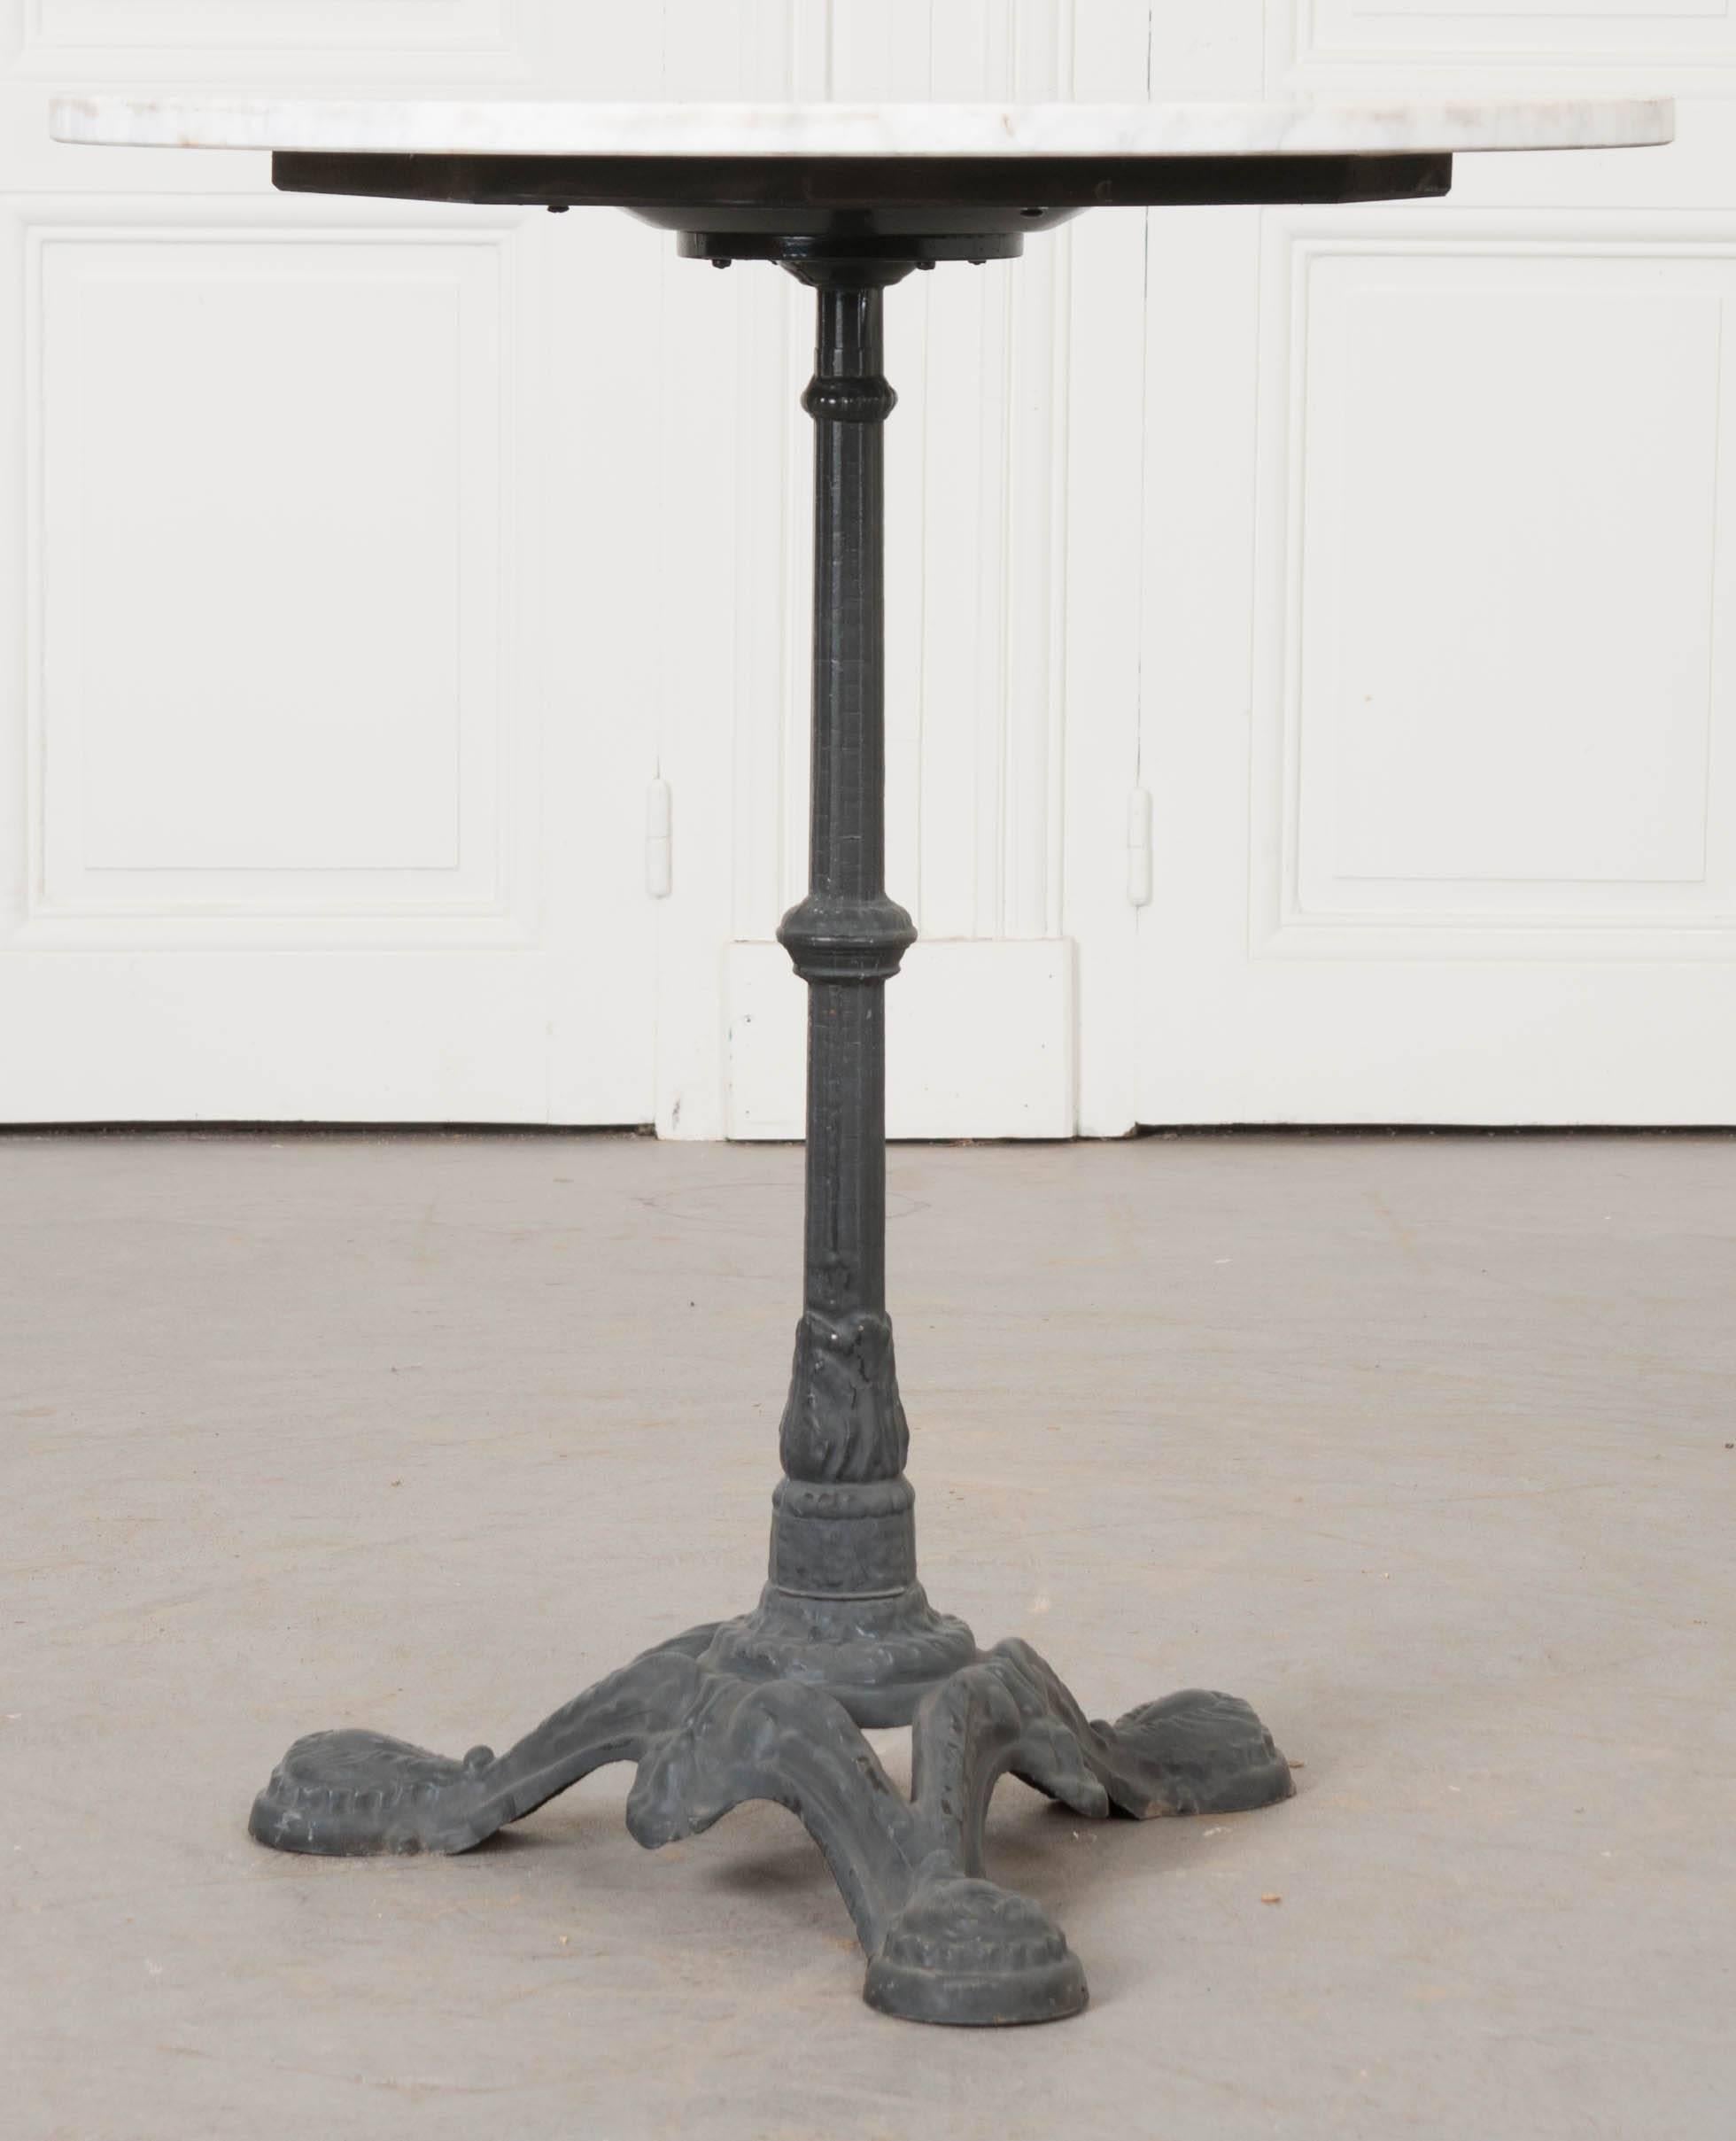 A classically styled French bistro table, with iron base and marble top, from the early part of the 20th century. The black painted base is made of cast iron, with three feet, and details in twisted ribbon and scrolled leaf motifs. The circular